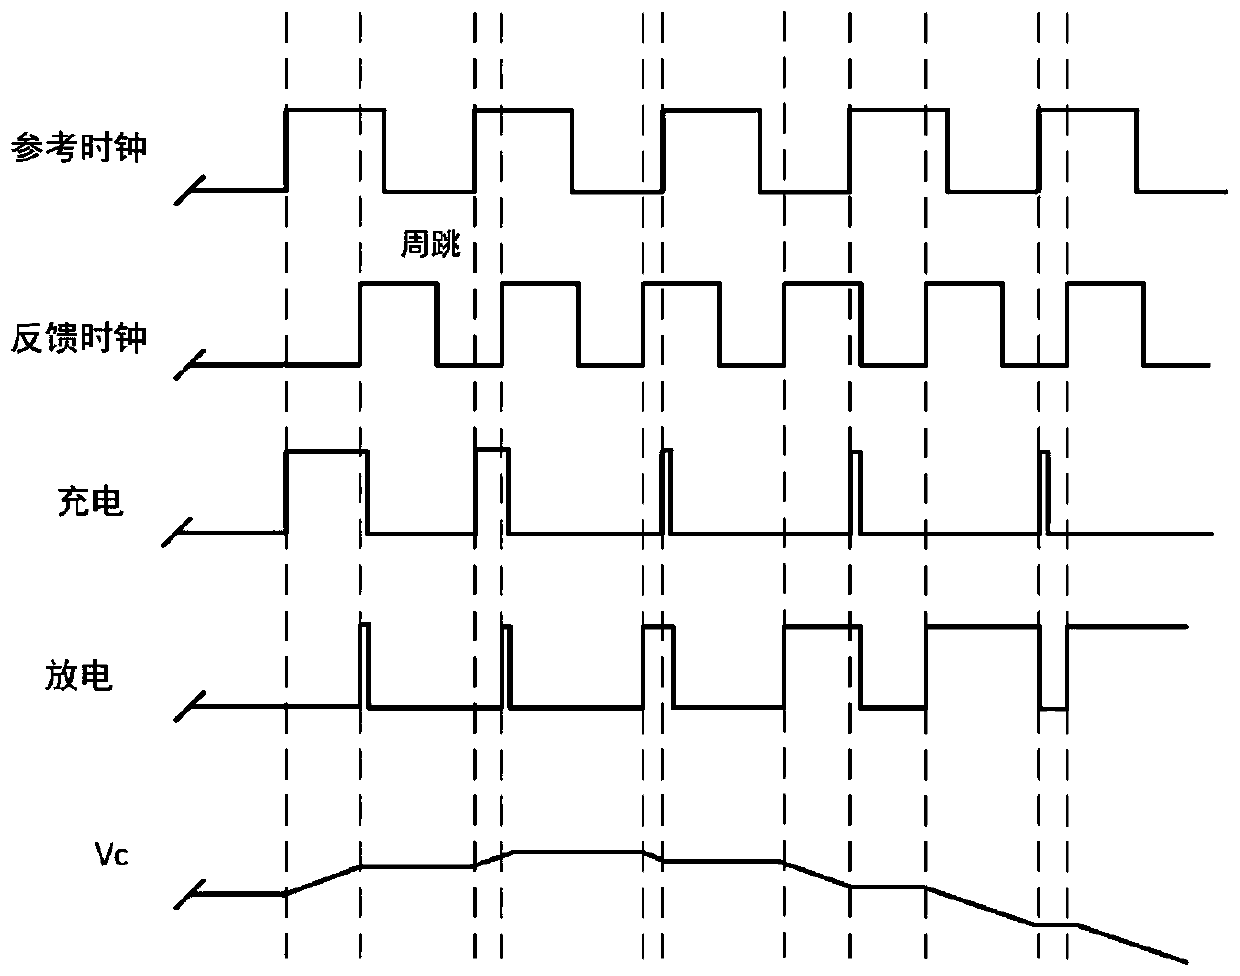 A Fast Locked-in Phase-Locked Loop Circuit Avoiding Cycle Skipping